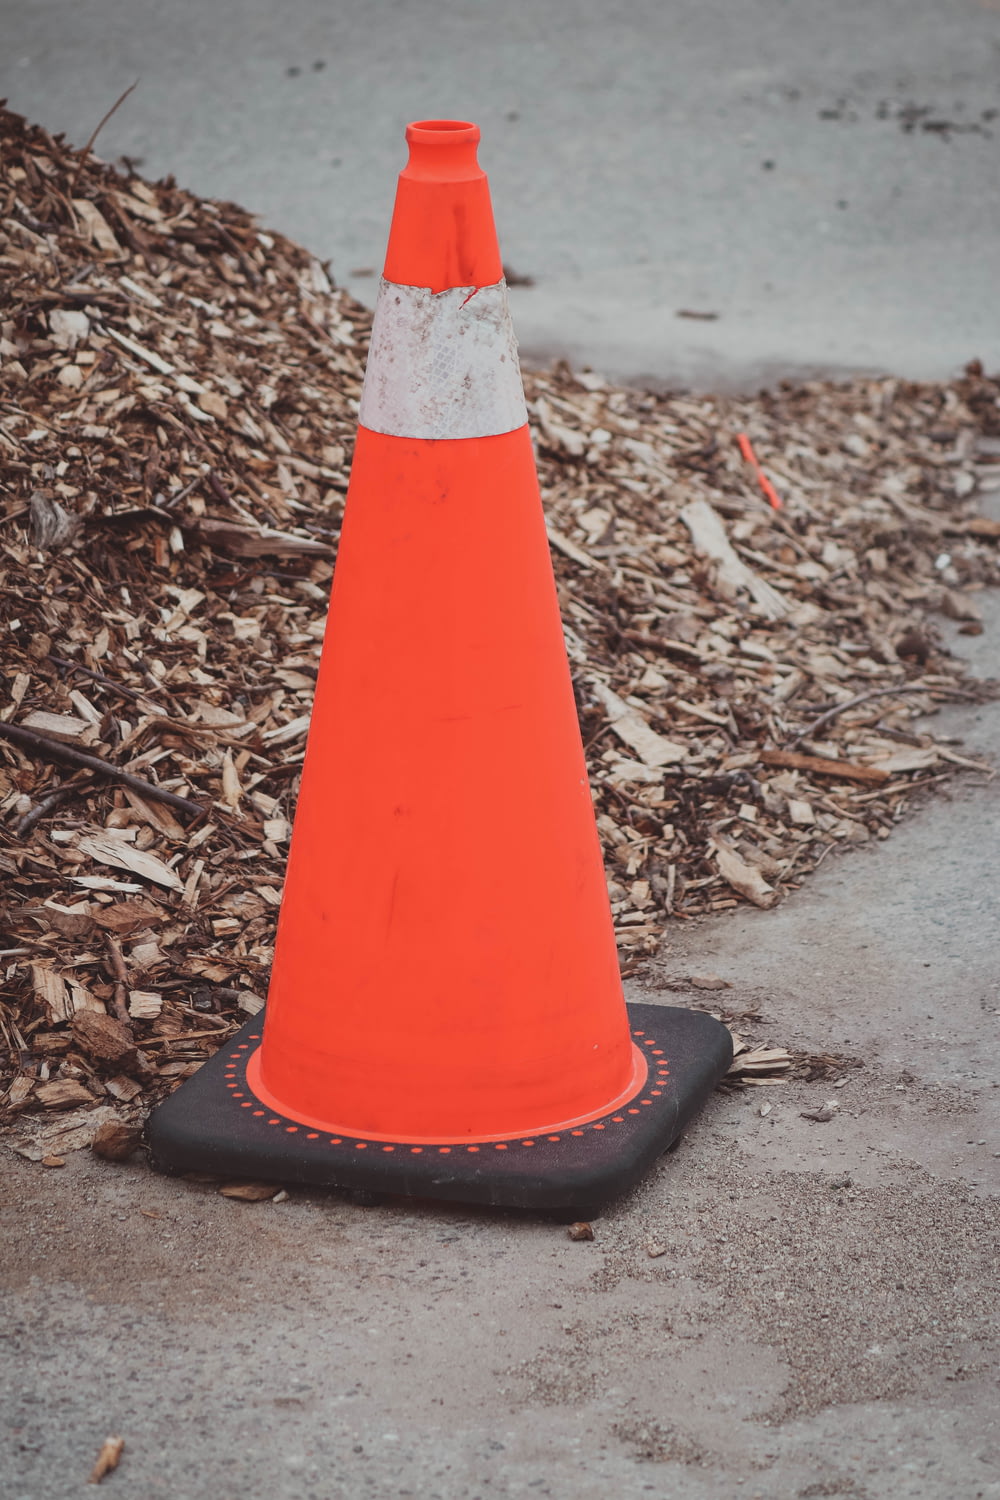 an orange traffic cone sitting on the side of a road